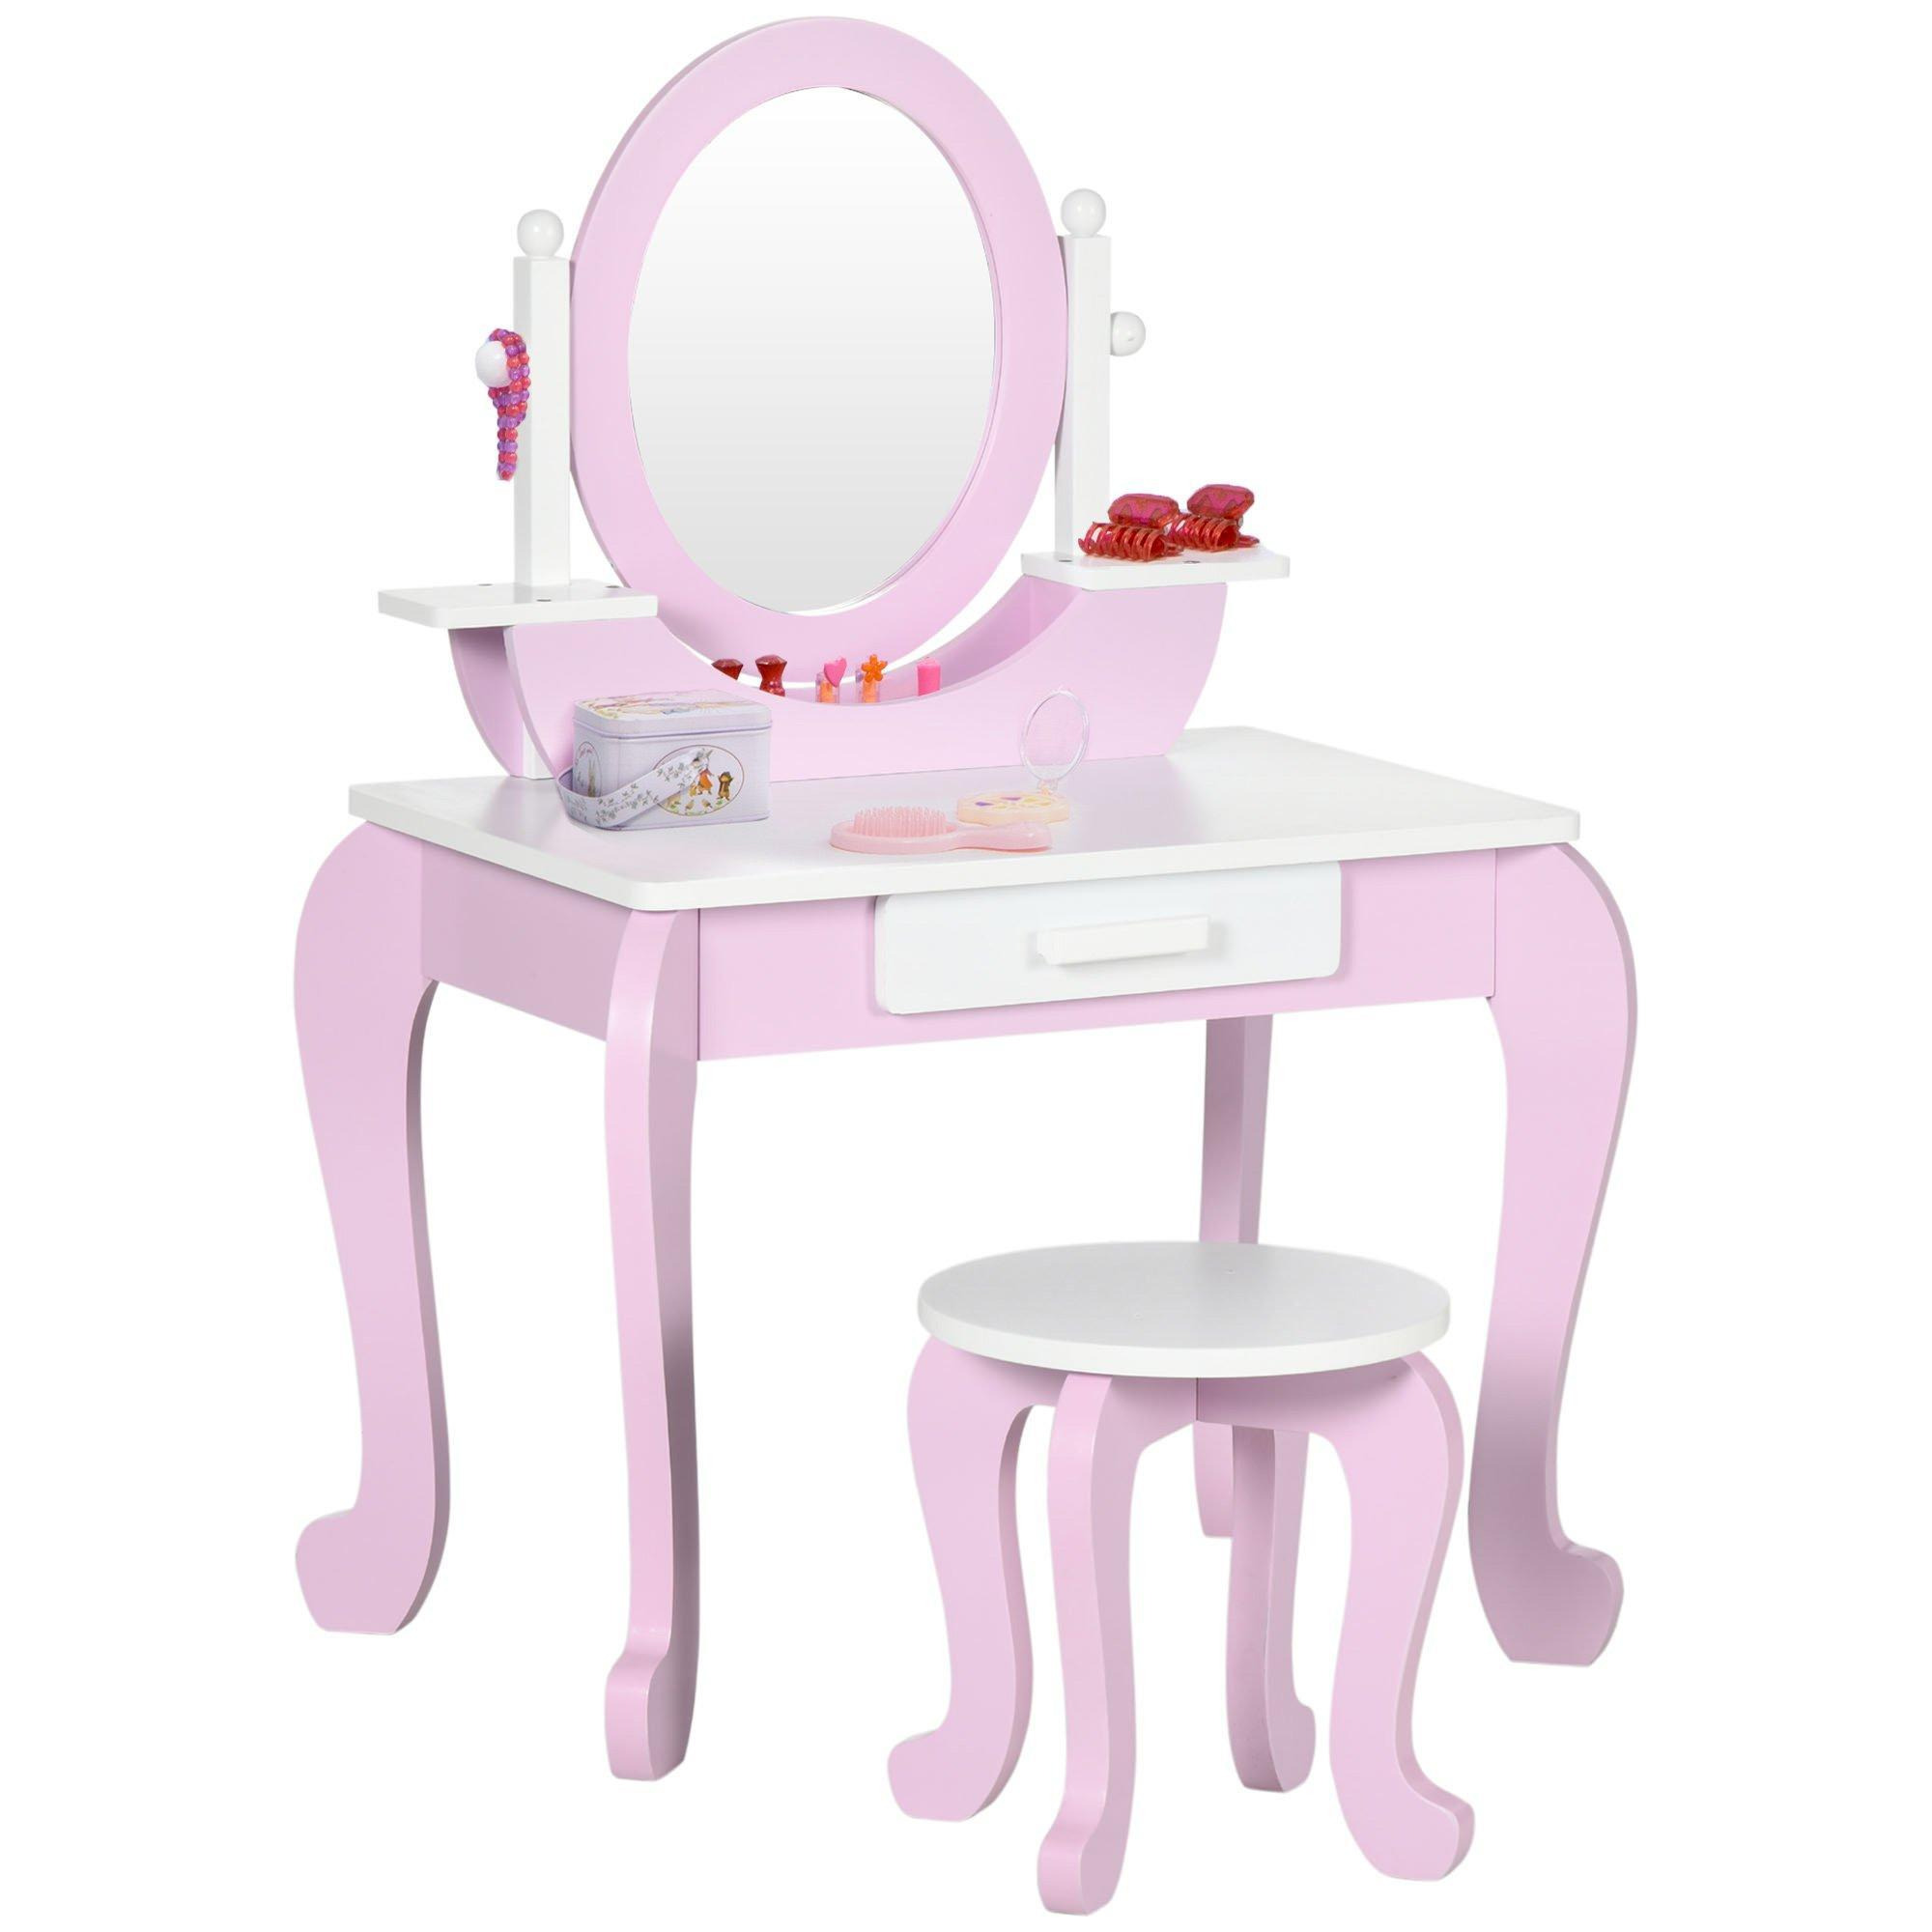 Kids Dressing Table with Mirror and Stool, for Ages 3-6 Years - Pink - image 1